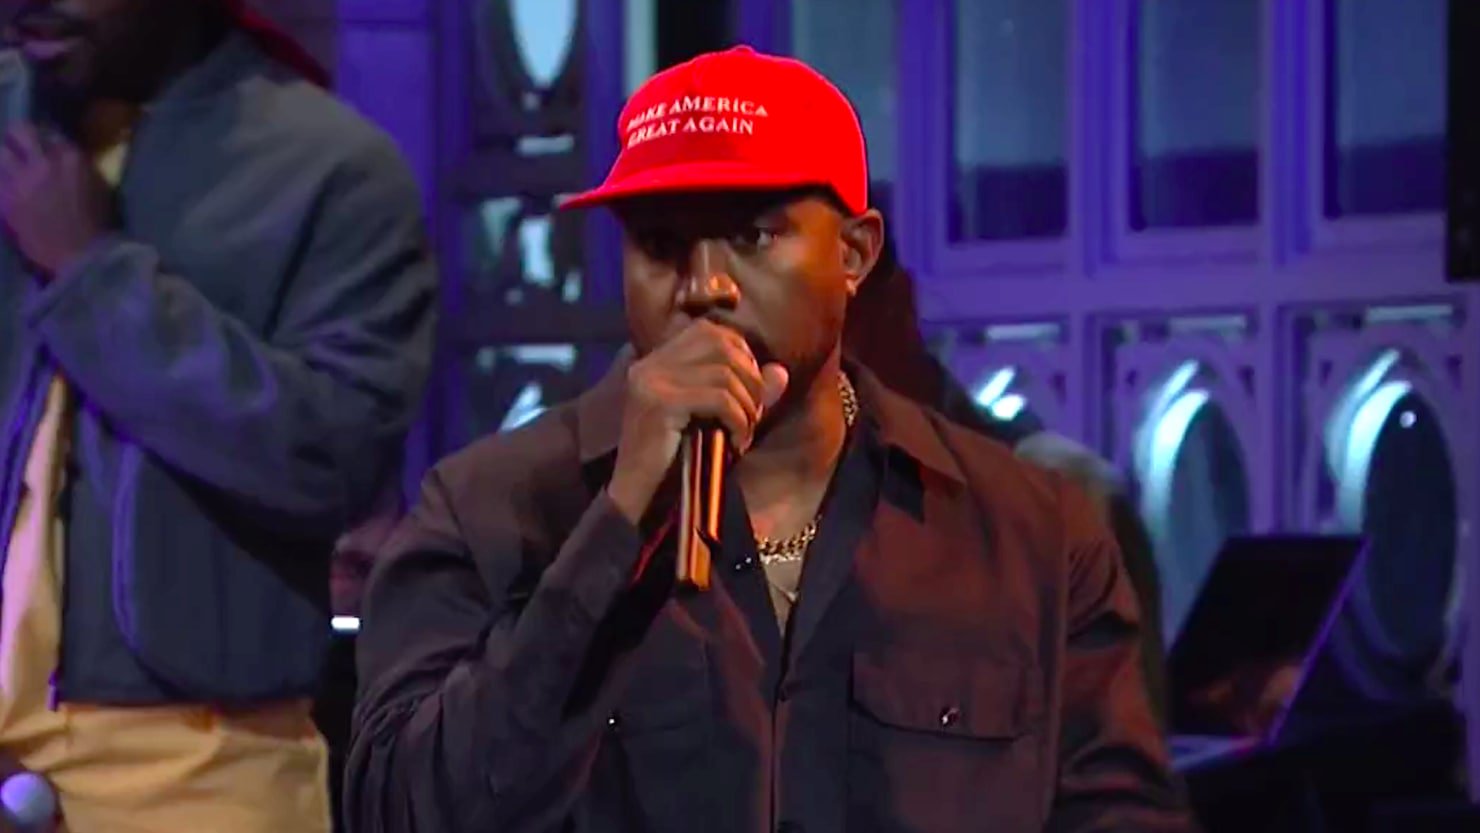 Kanye West Wants You To Take His Doomed Run For President Seriously